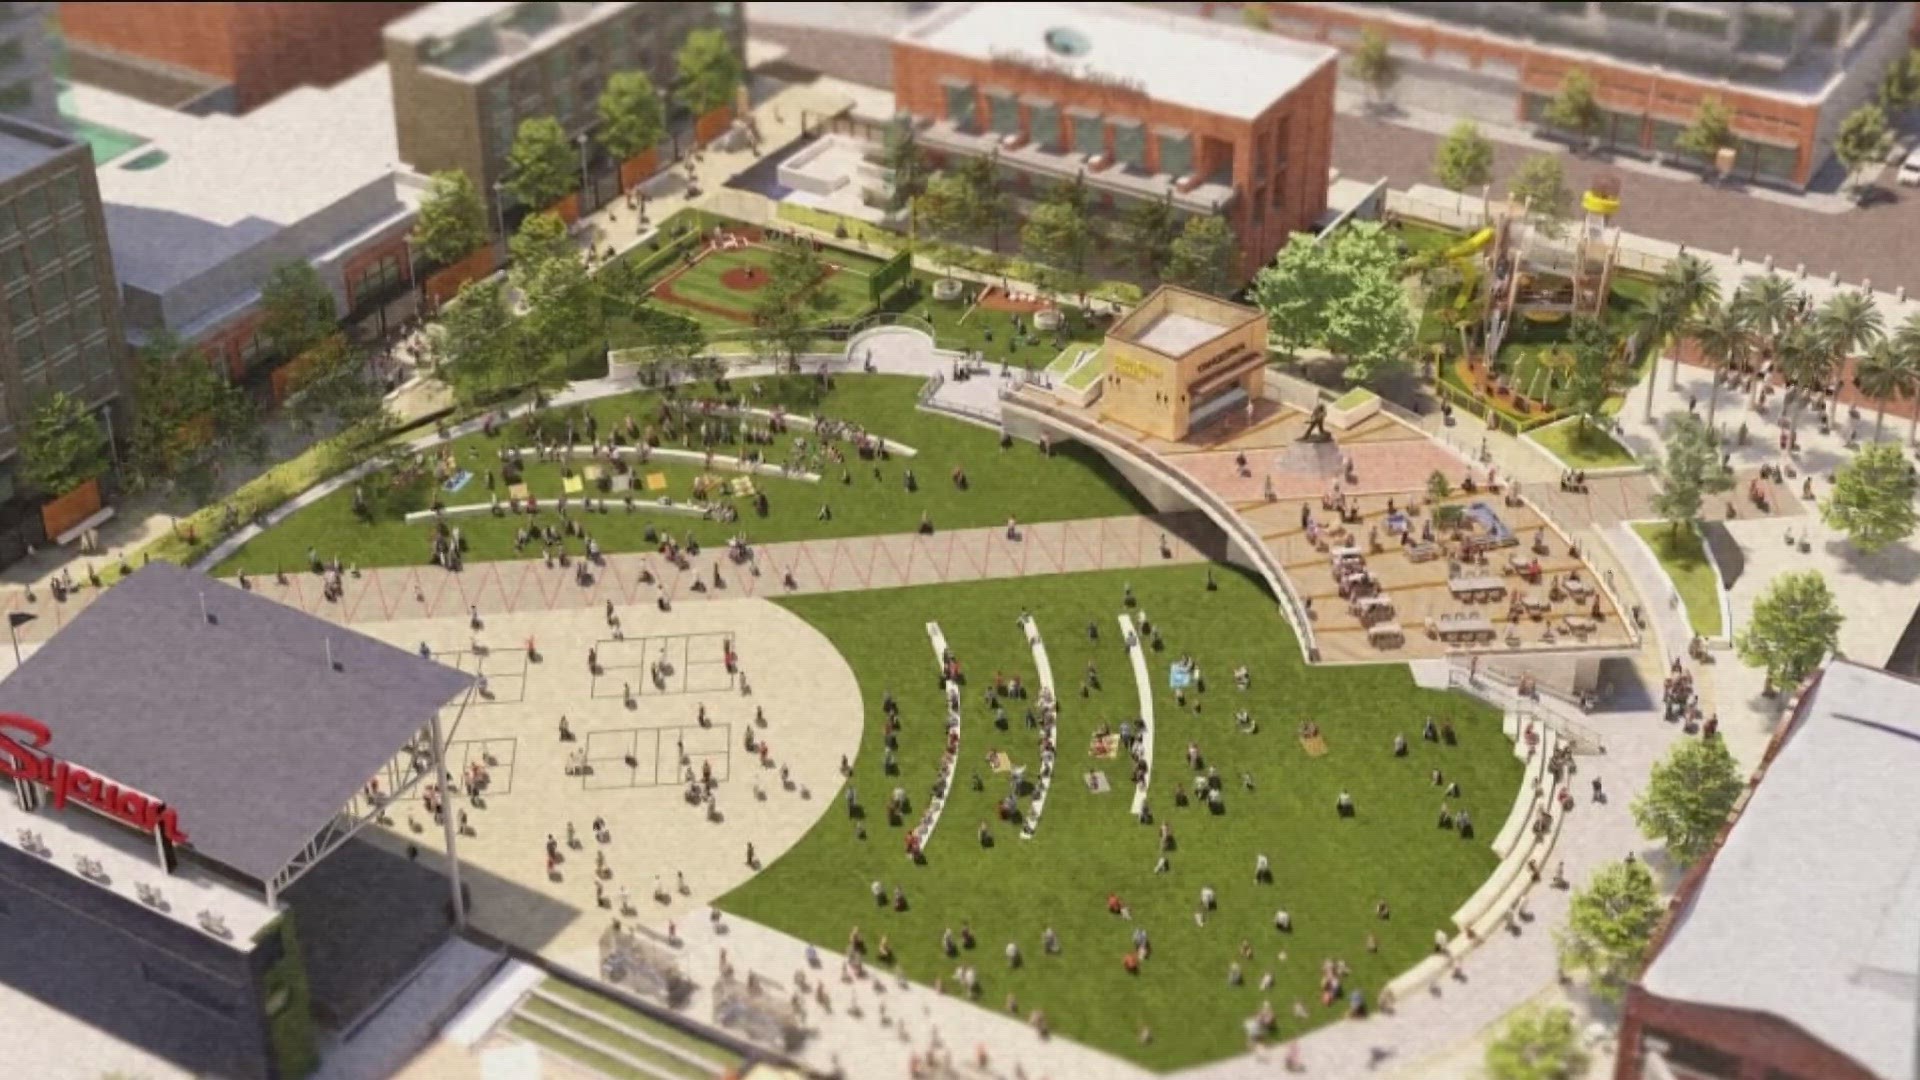 A 20th anniversary renovation is coming to Padres Gallaher Square.